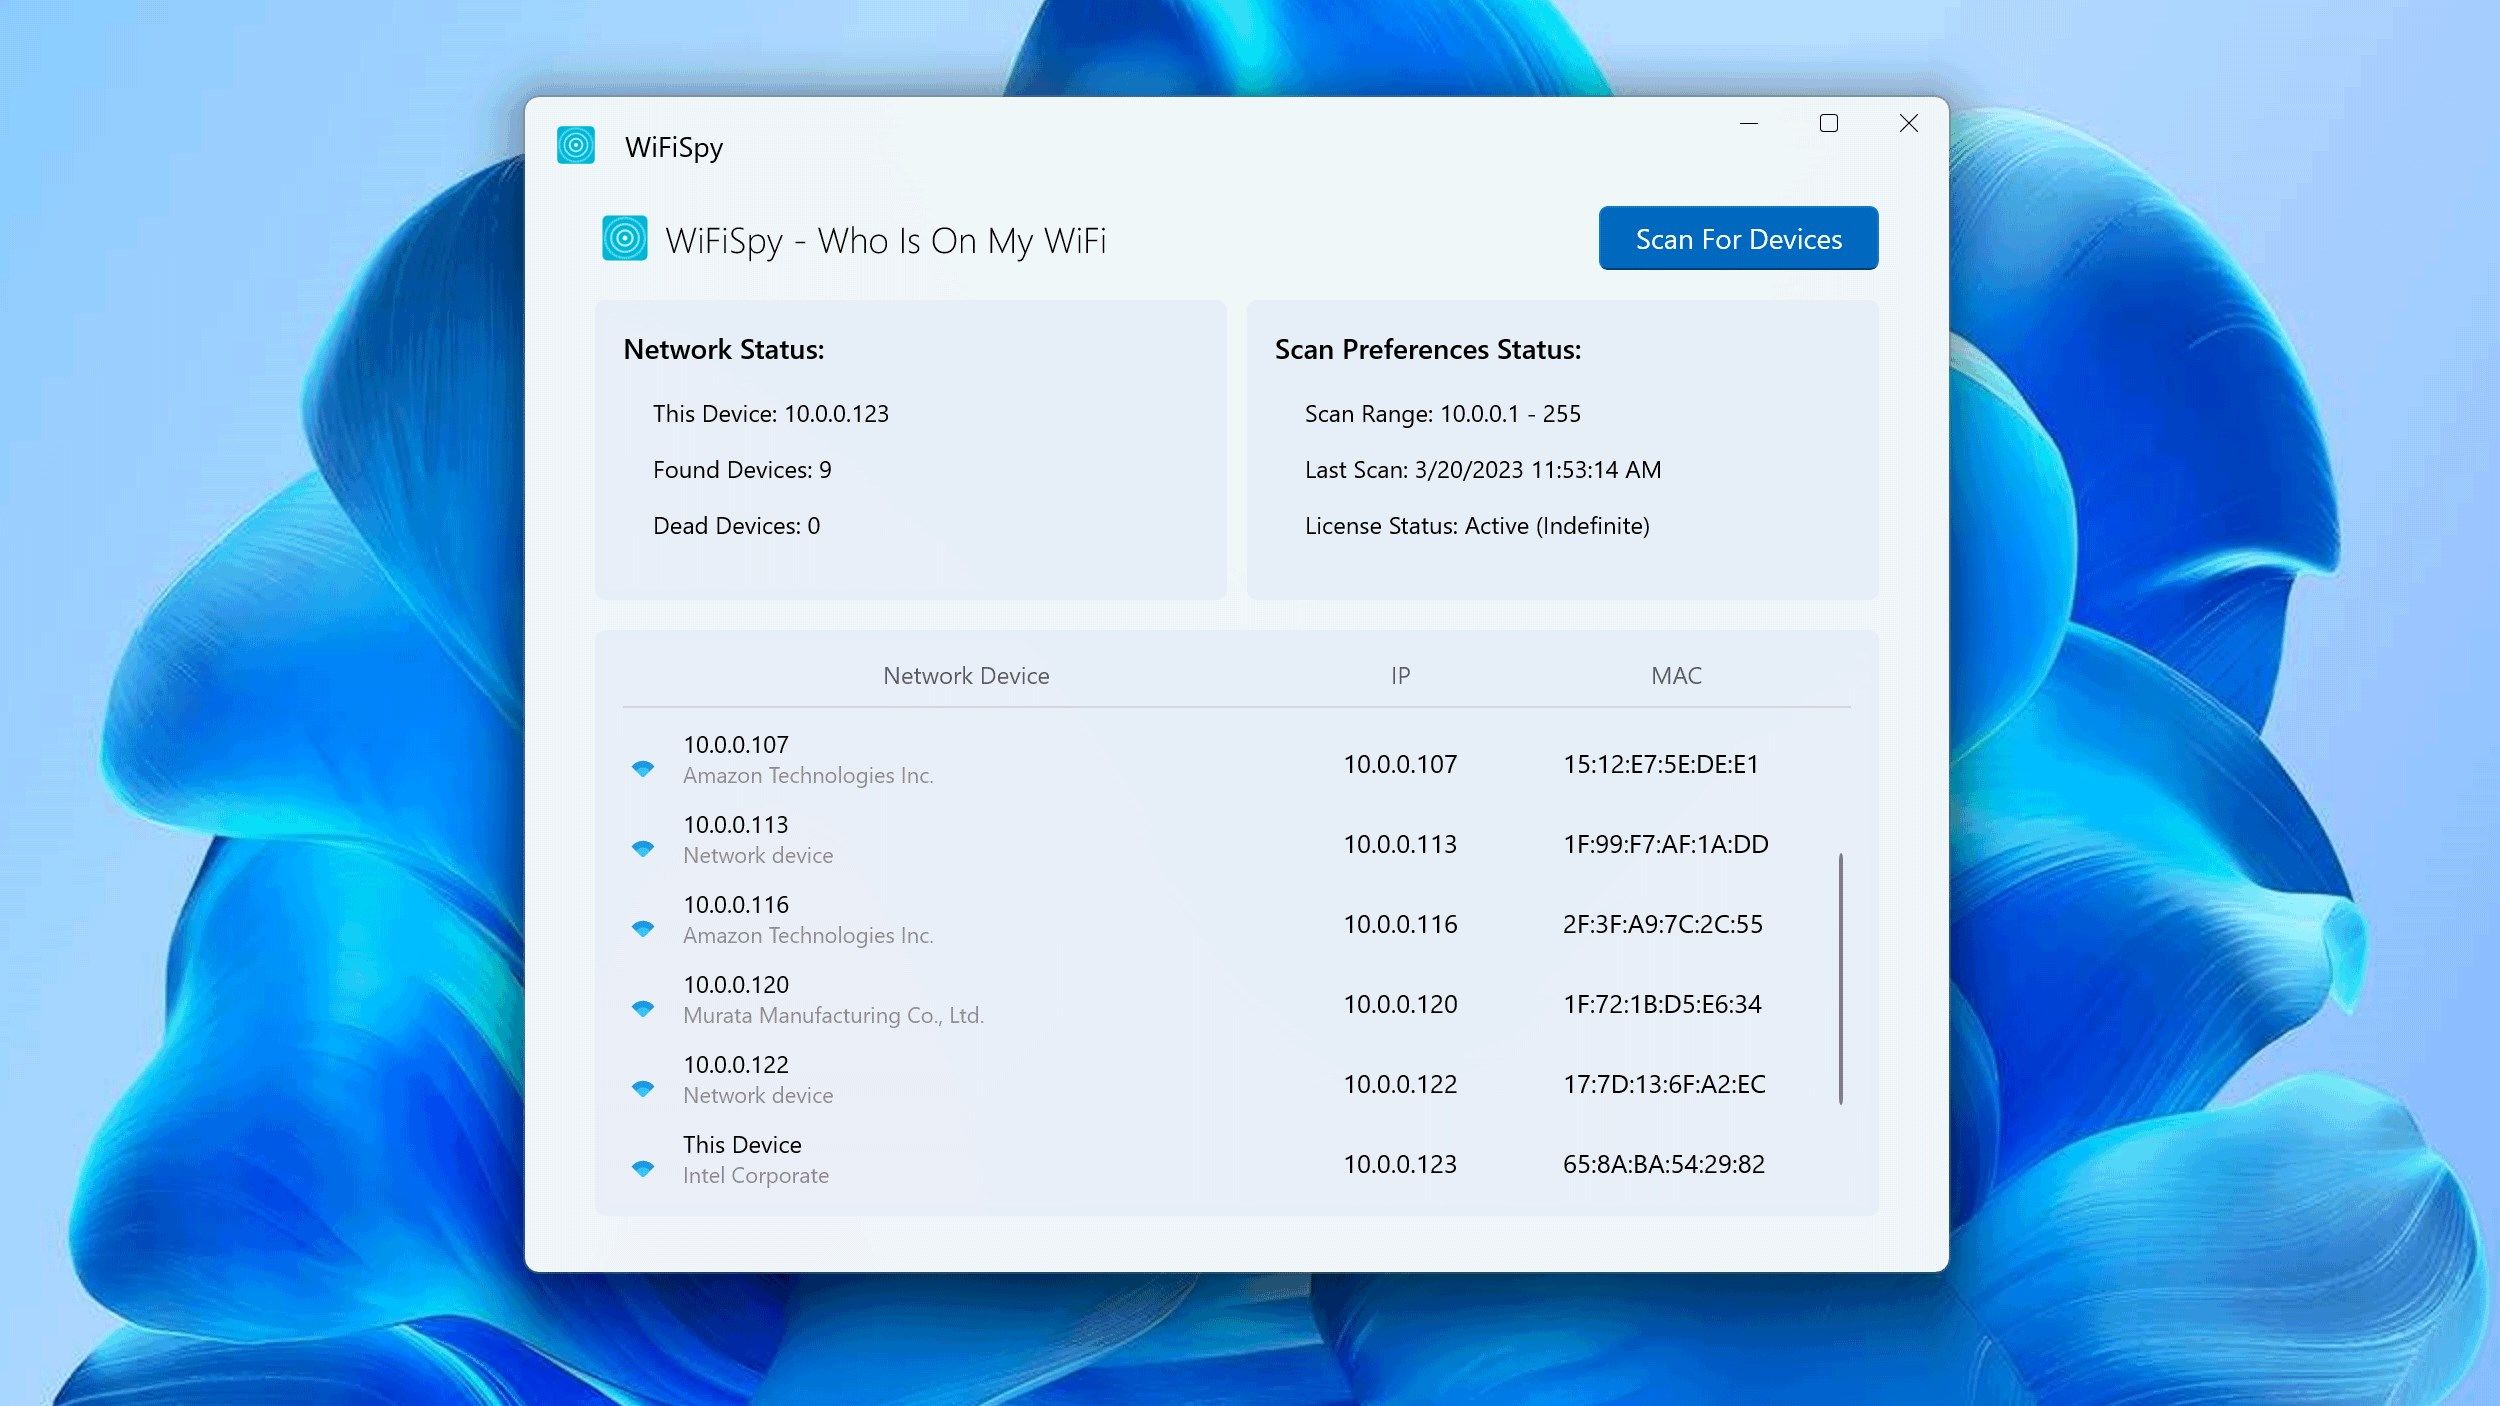 WiFiSpy - Who Is On My WiFi